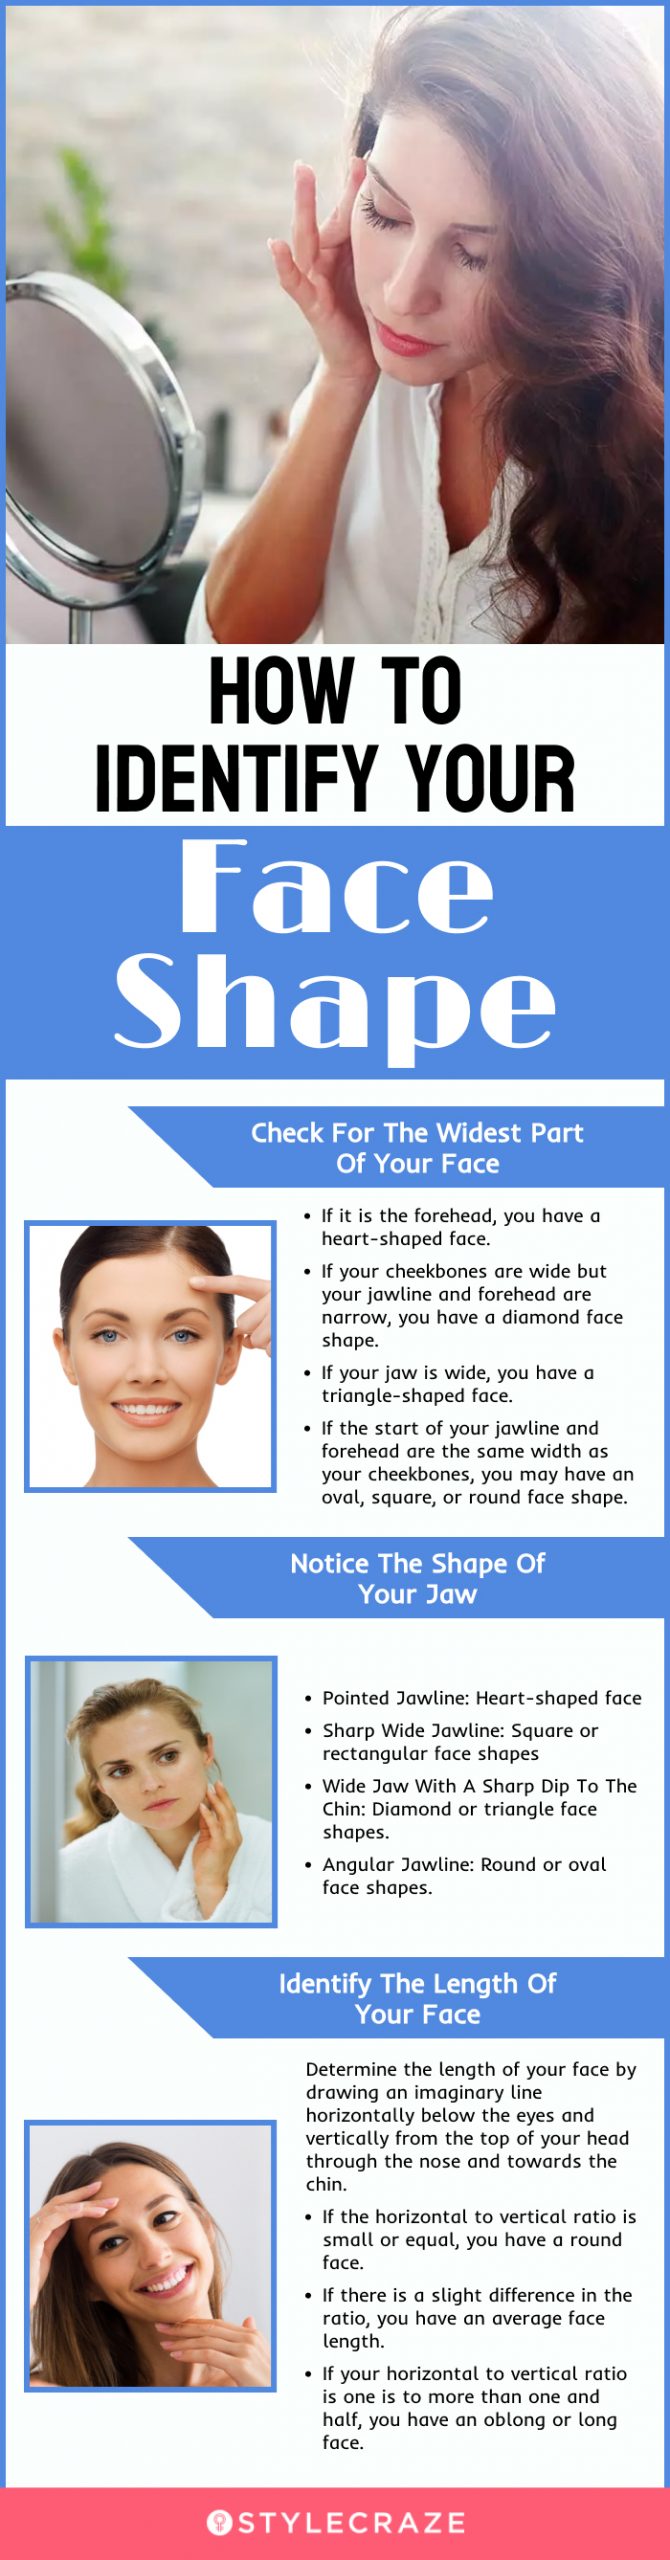 how to identify your face shape (infographic)